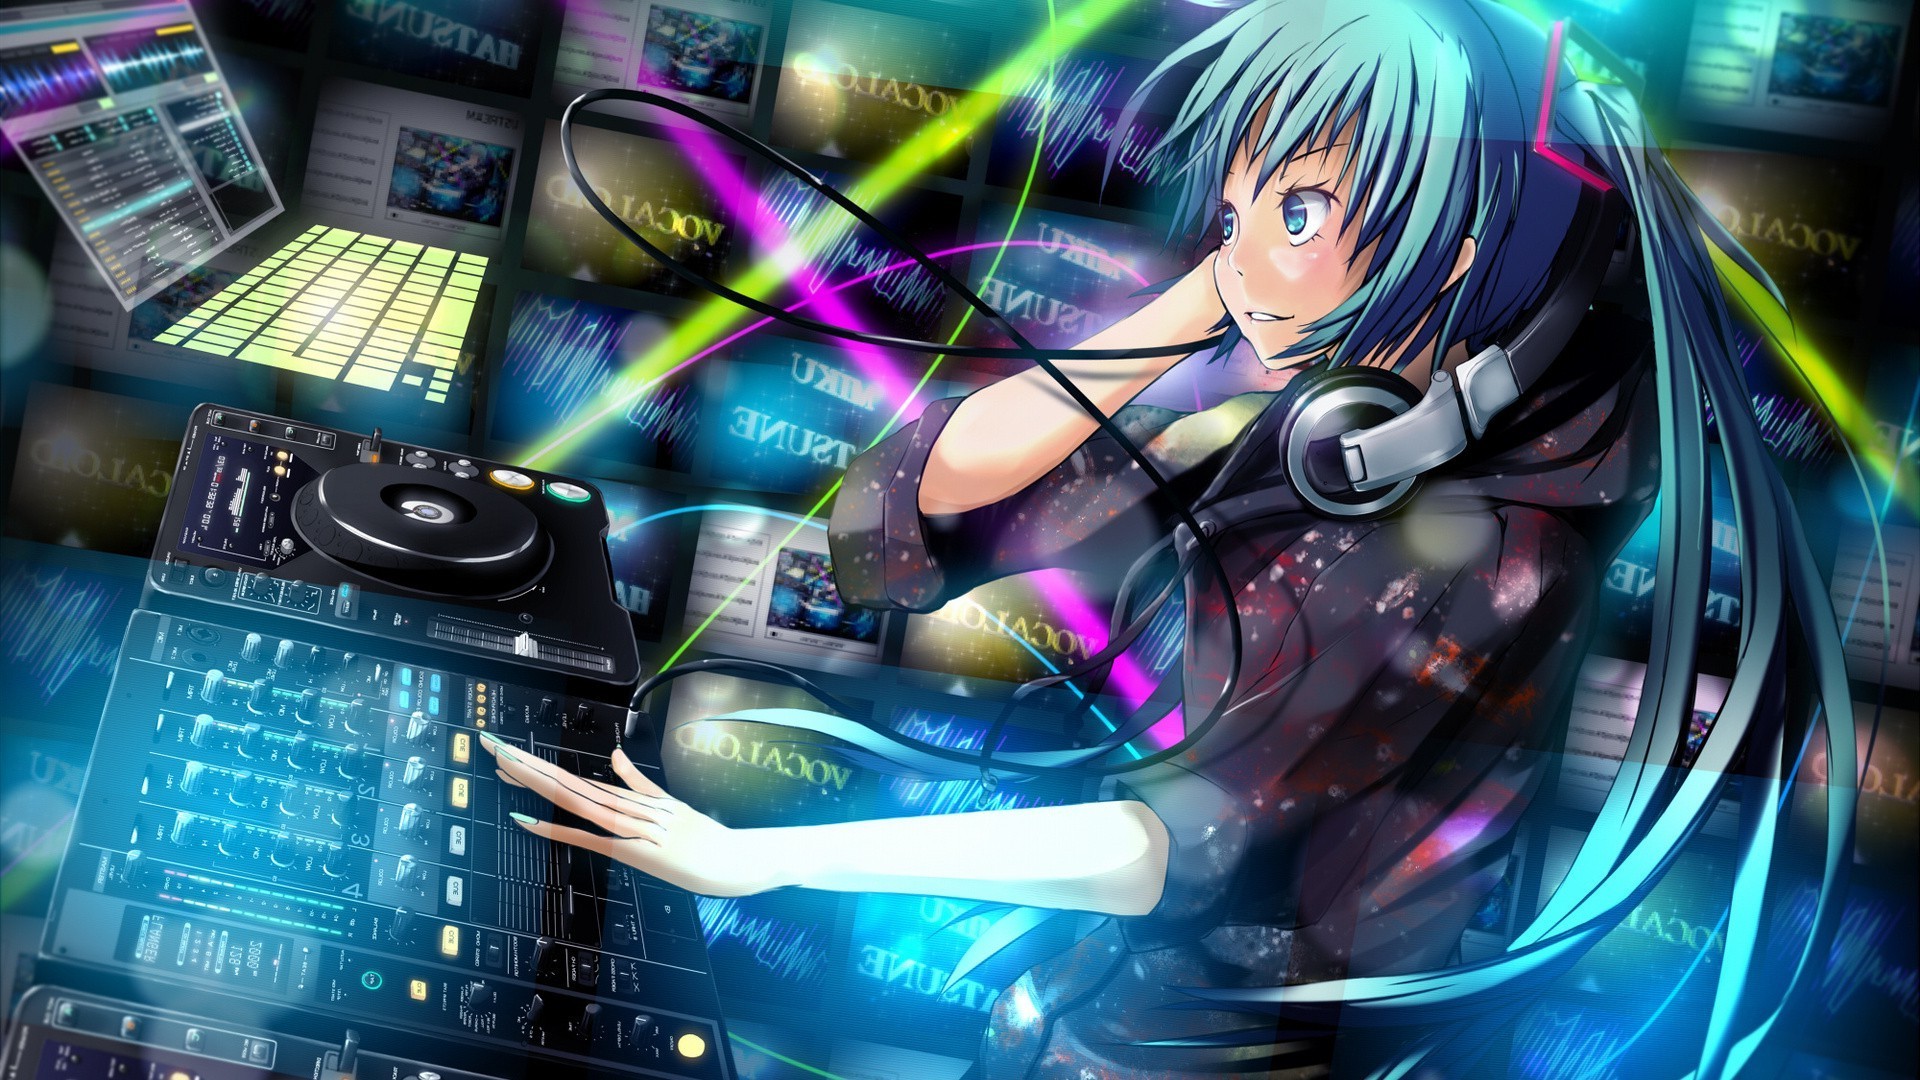 Anime Hatsune Miku Vocaloid Anime Girls Dj Mixing Consoles Wallpapers Hd Desktop And Mobile Backgrounds